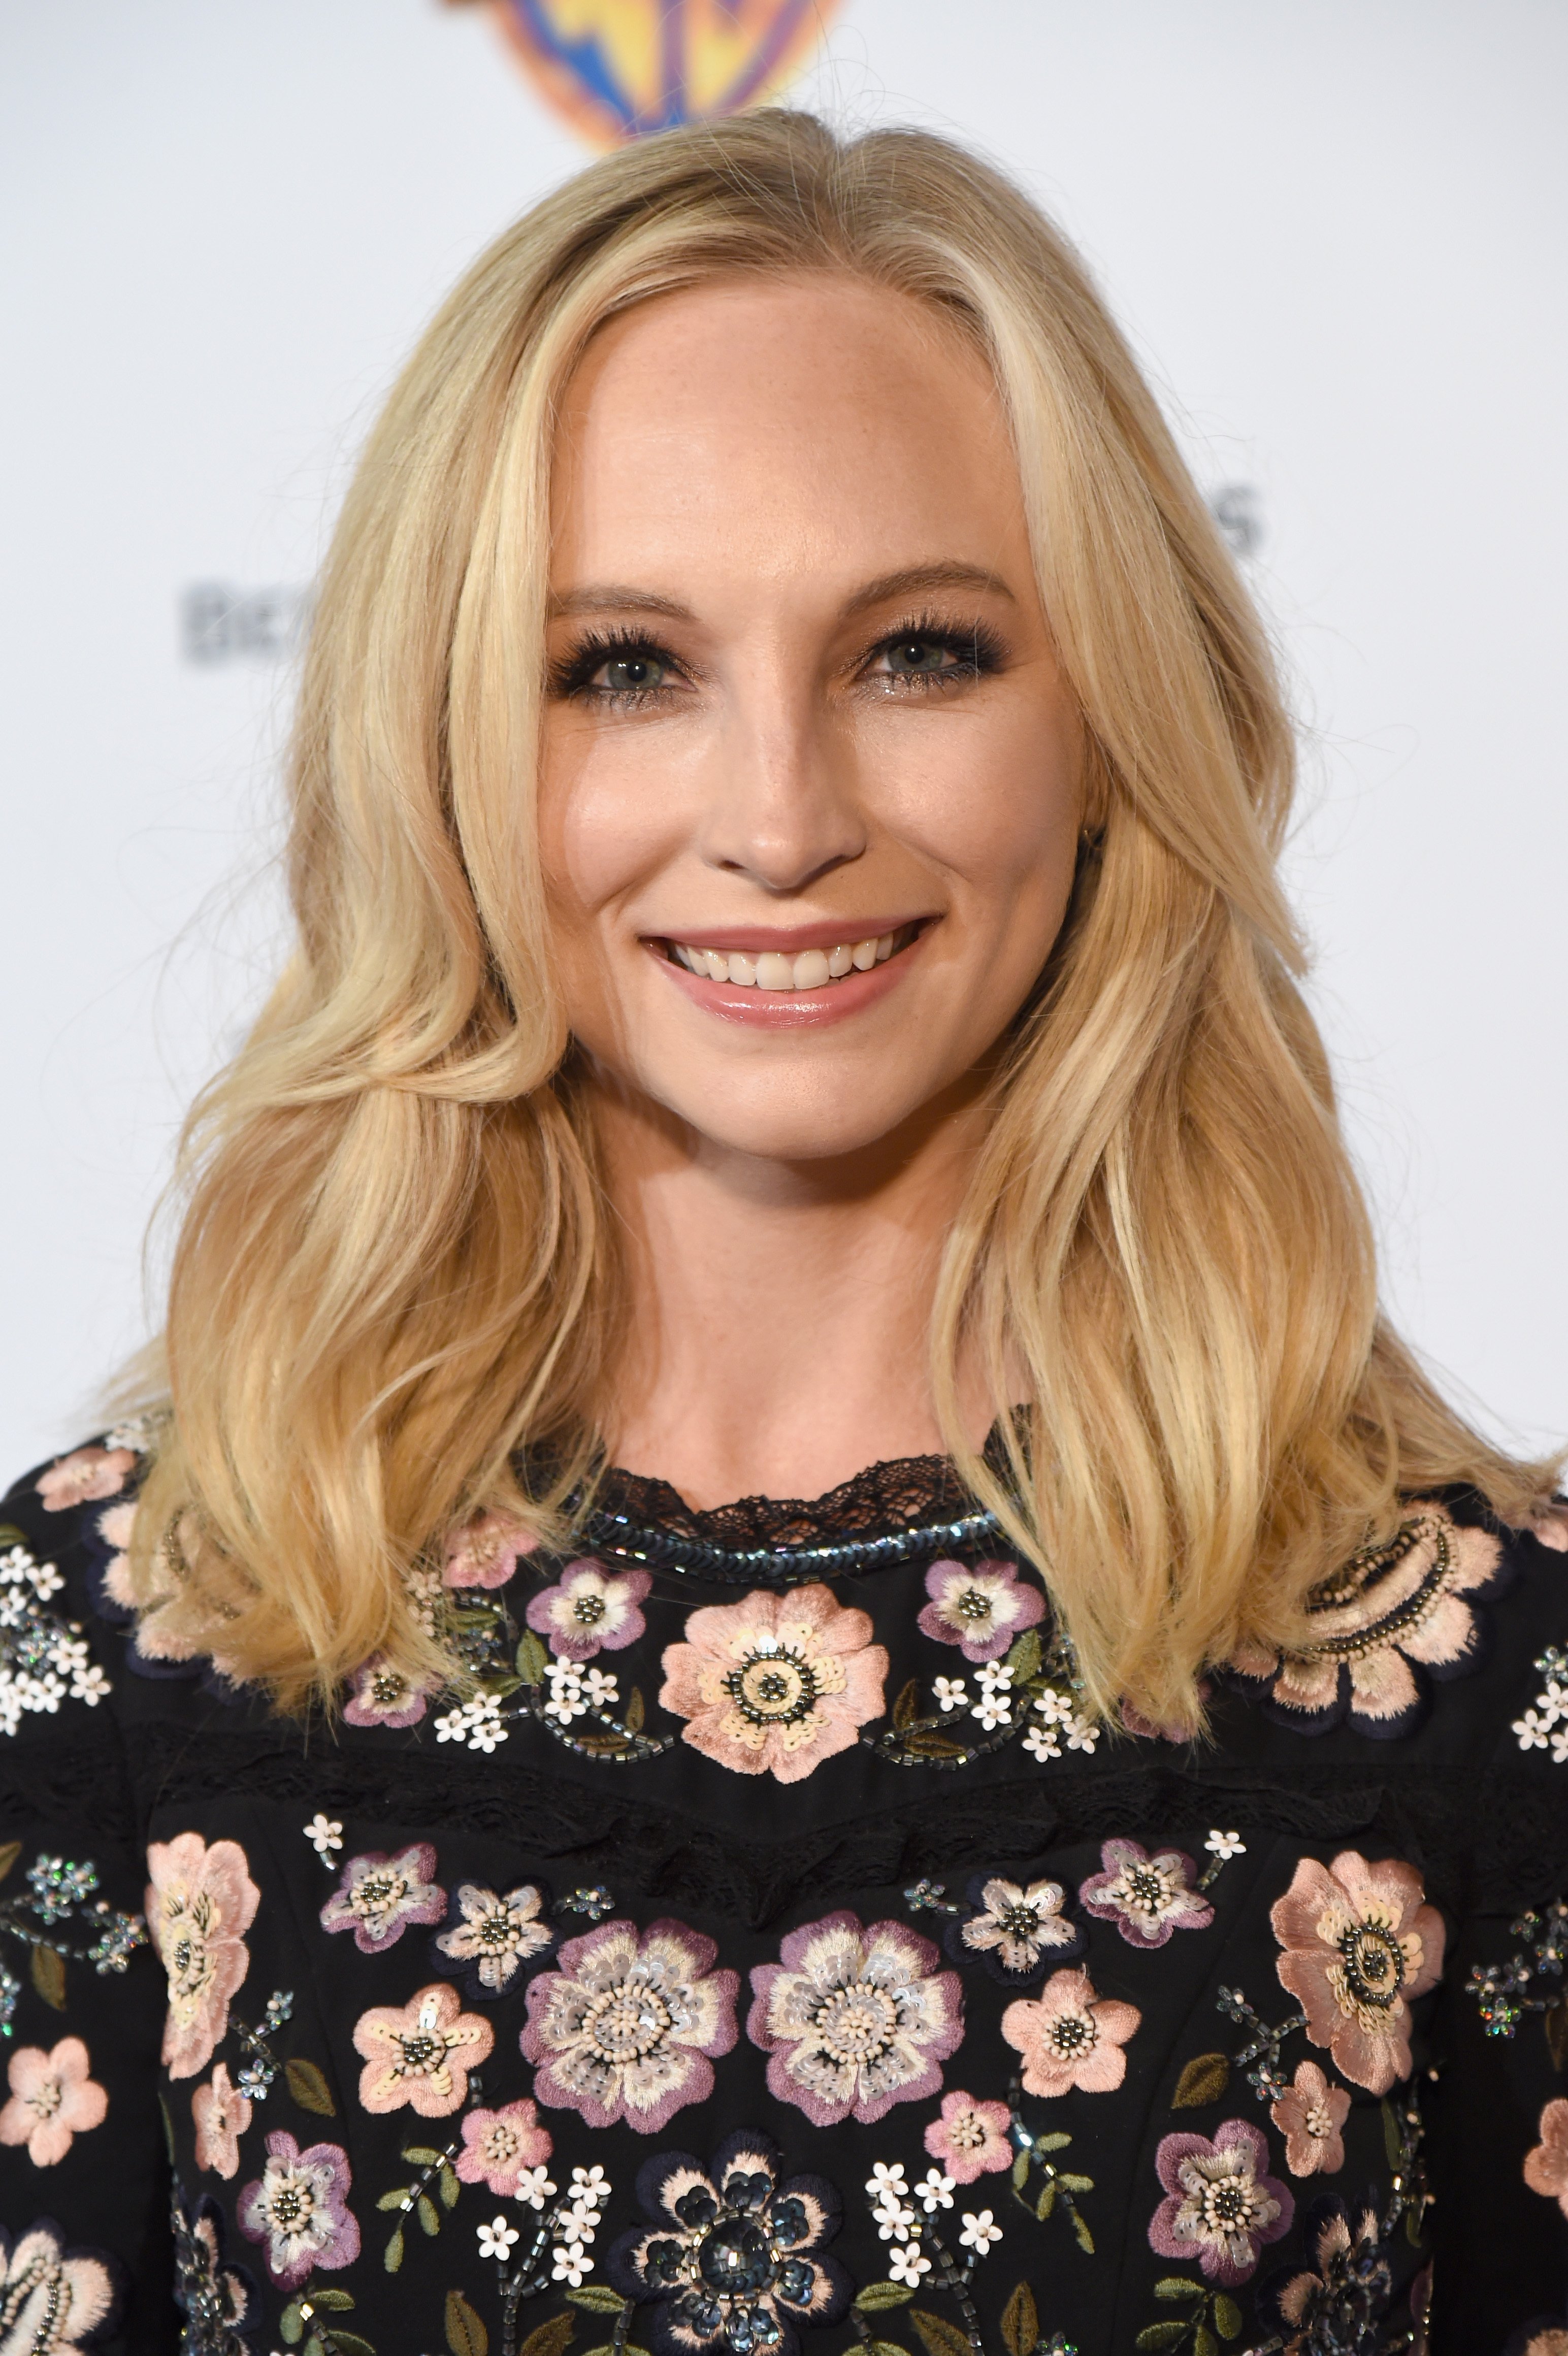 Vampire Diaries Star Candice Accola King Welcomes Her Second Daughter